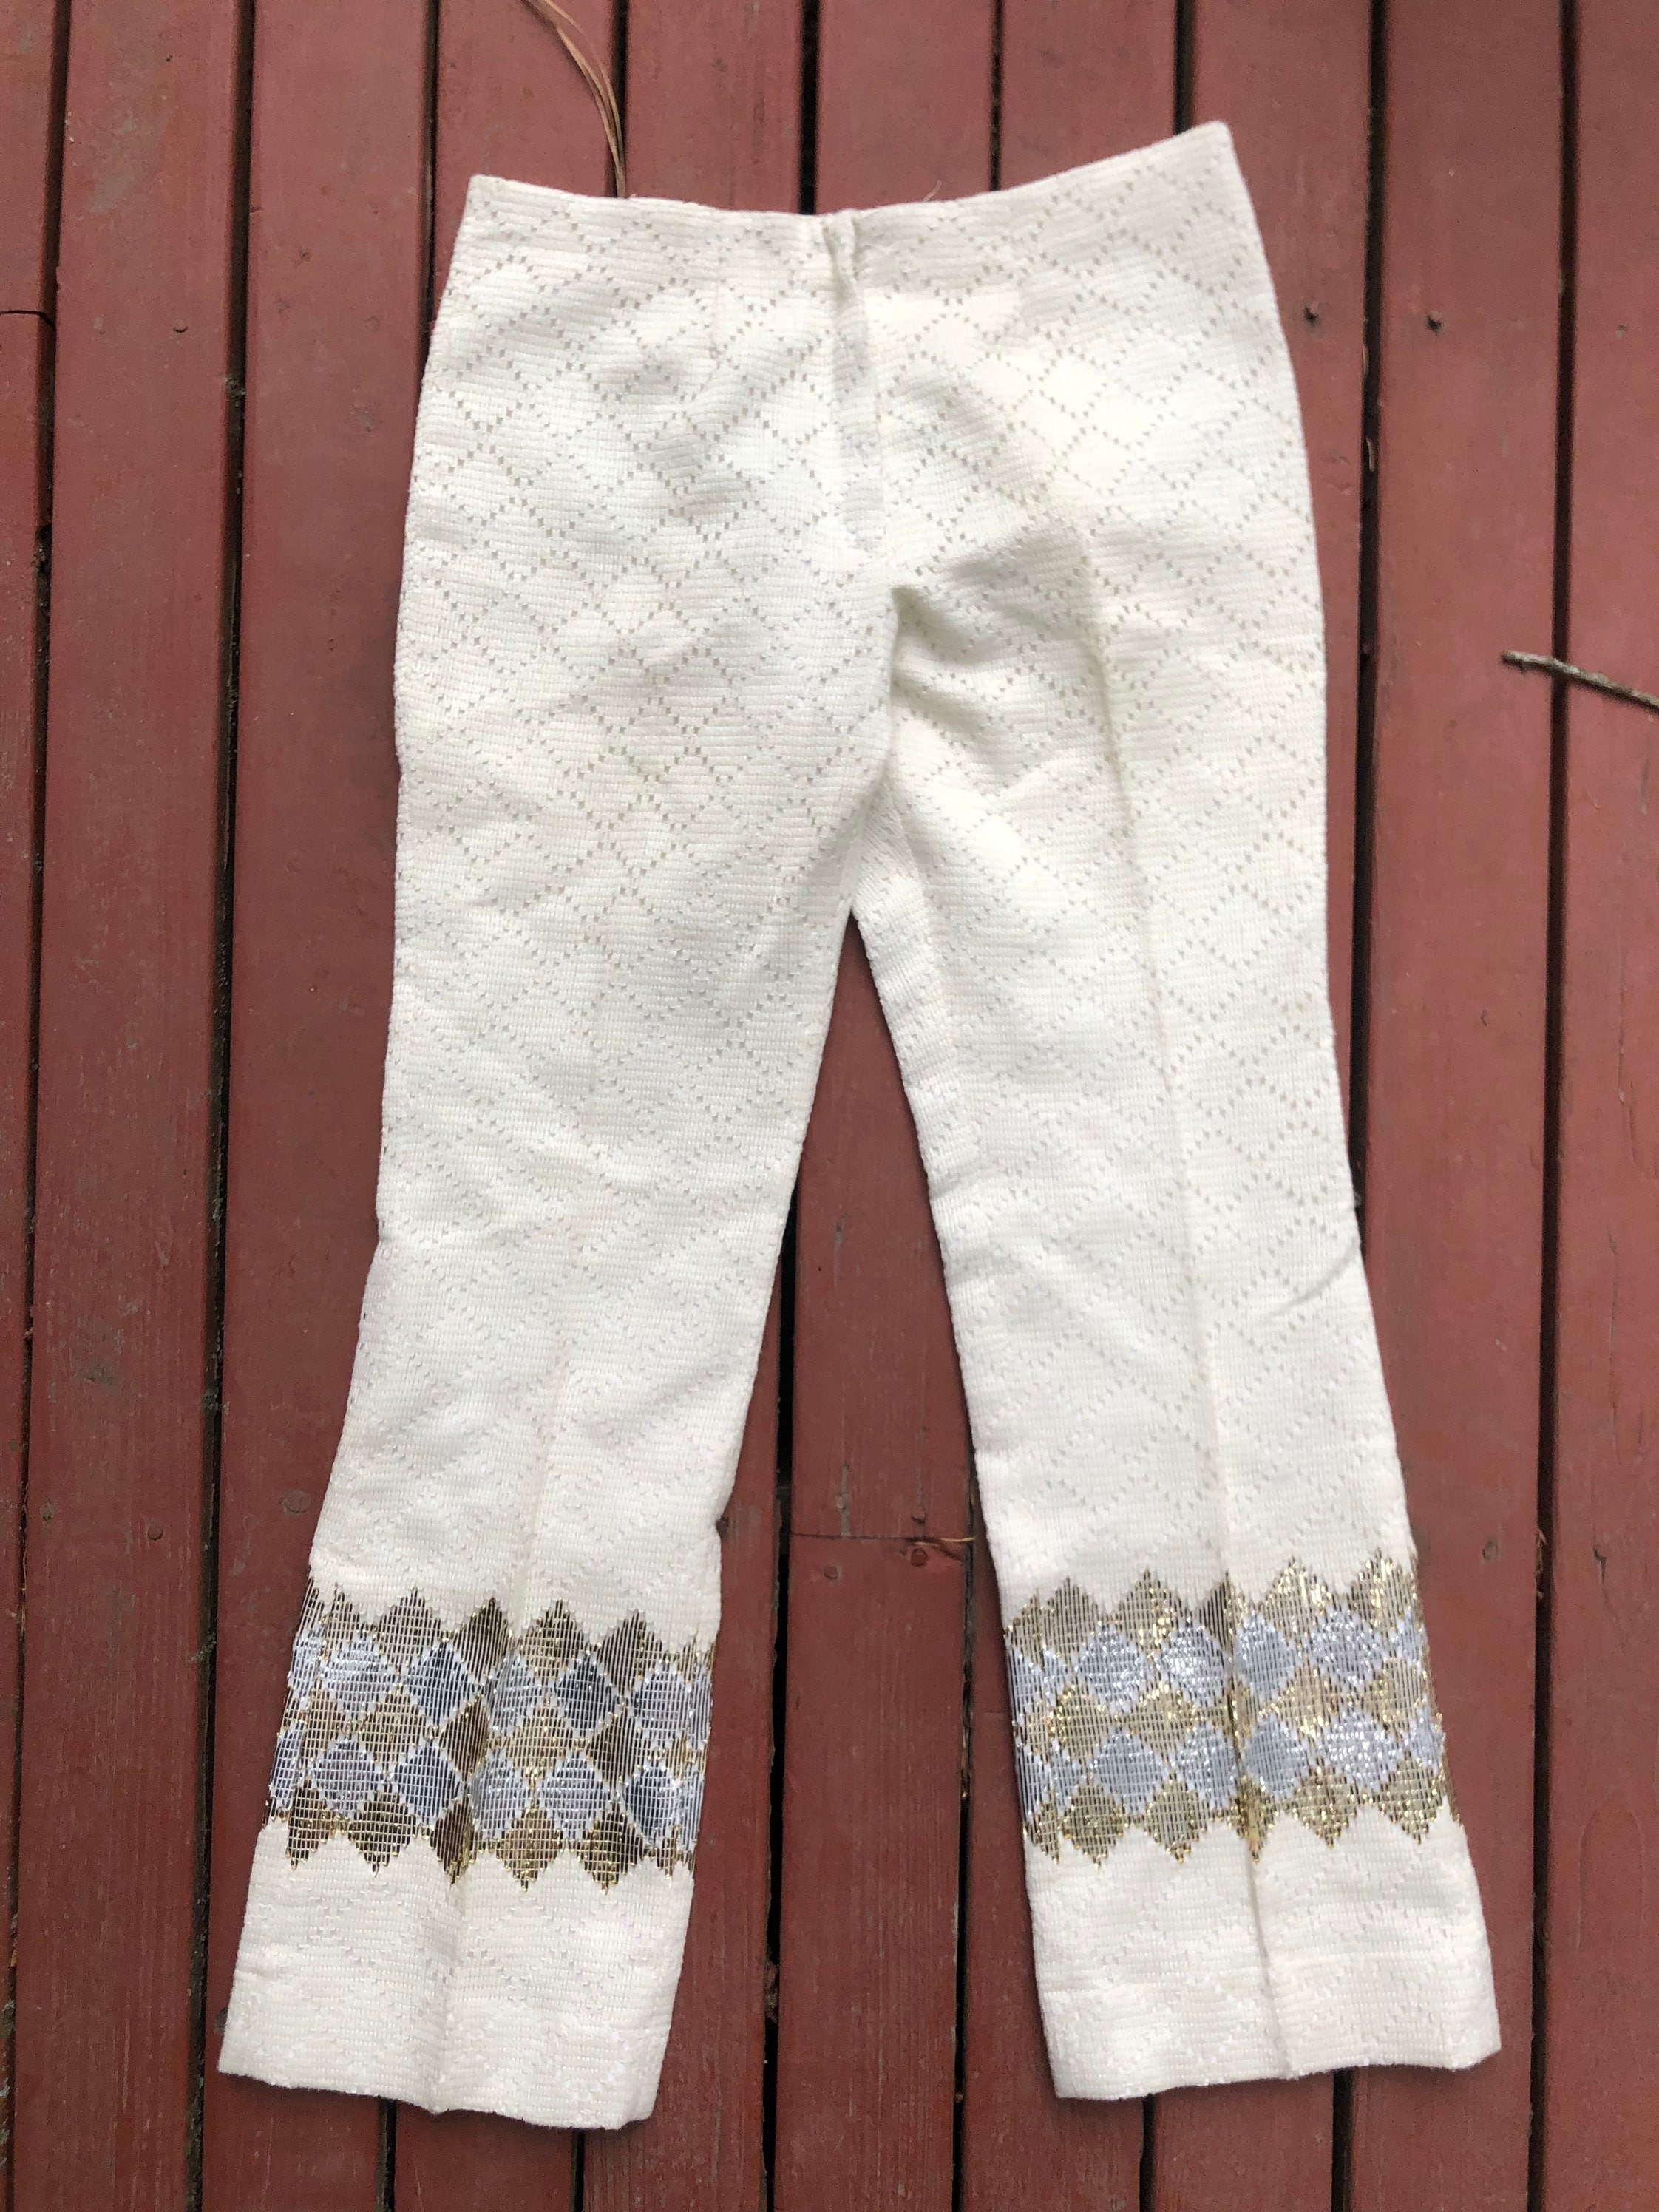 60s Knit White and Gold Foil Top and Pants Suit Set - Etsy UK